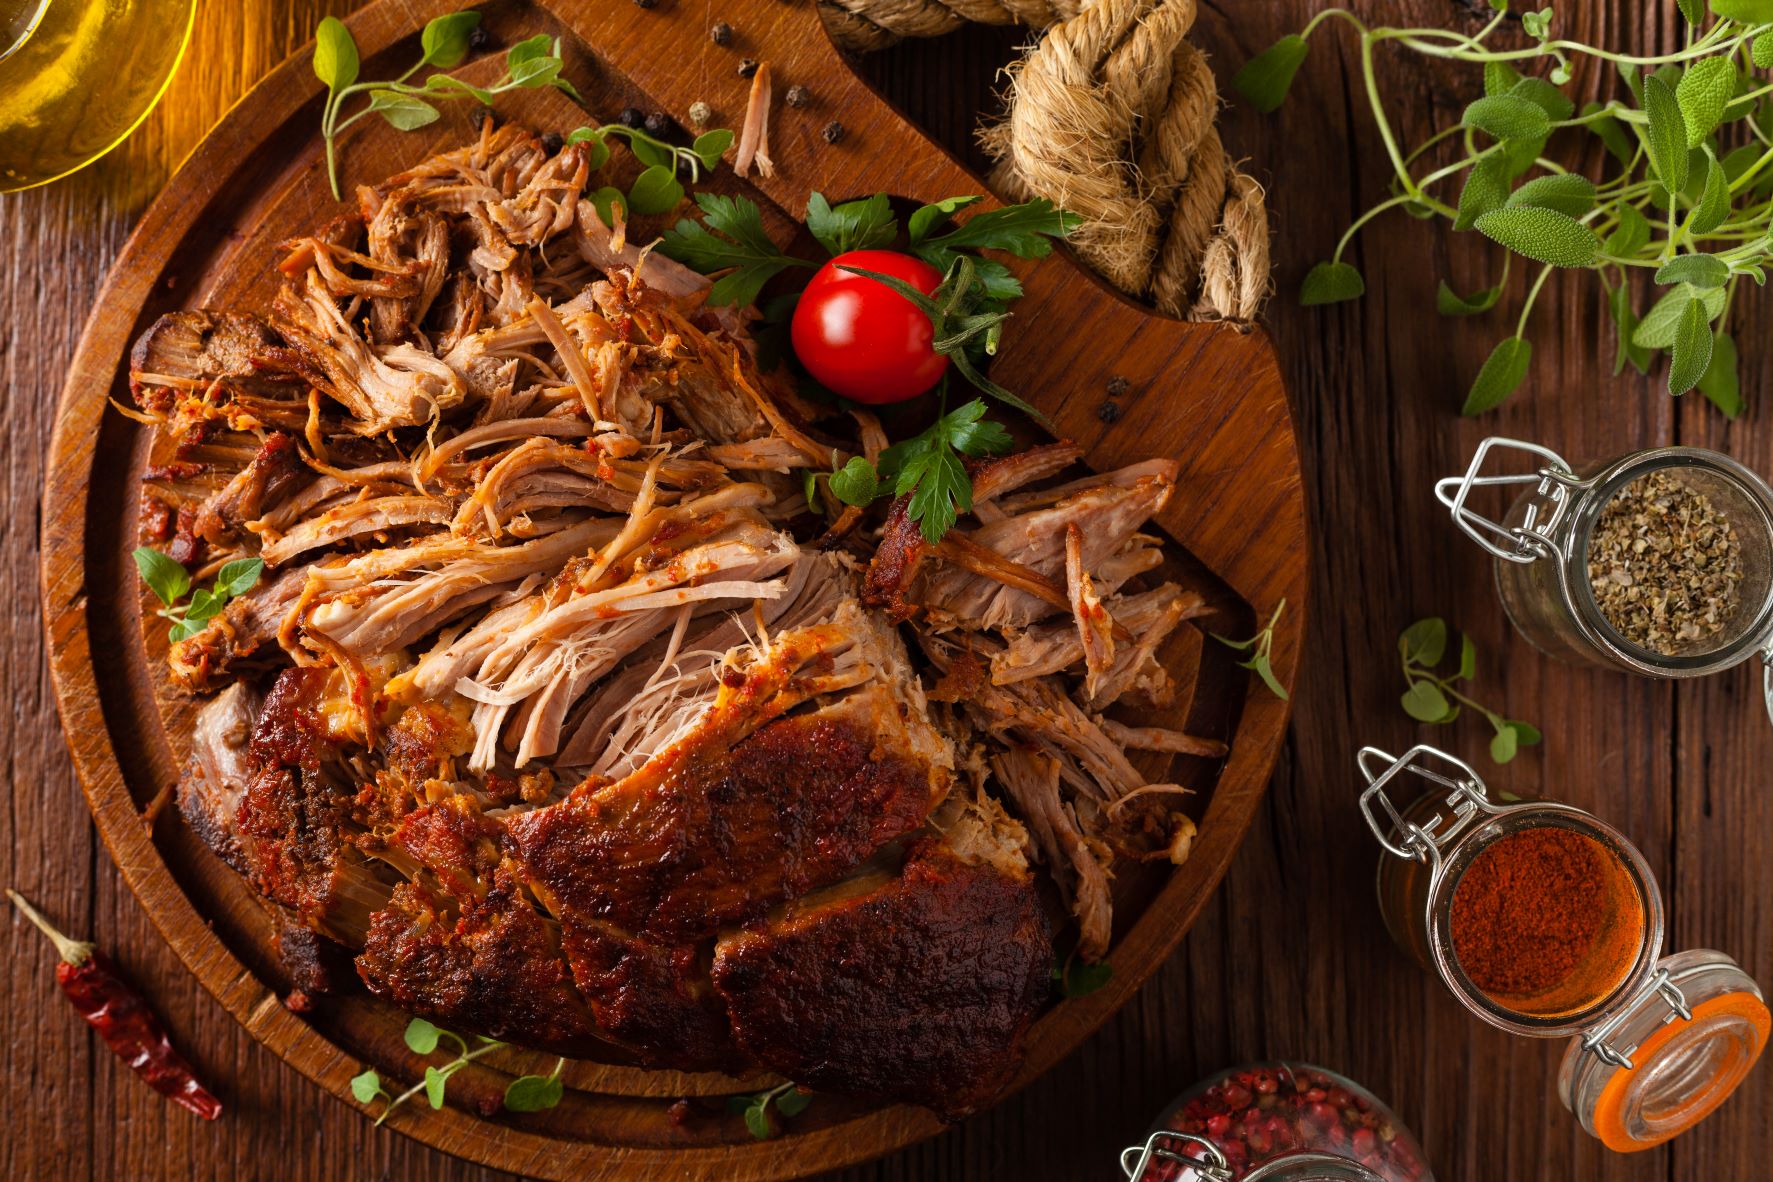 Pulled pork with BBQ sauce Recipe | Buy West Eat Best